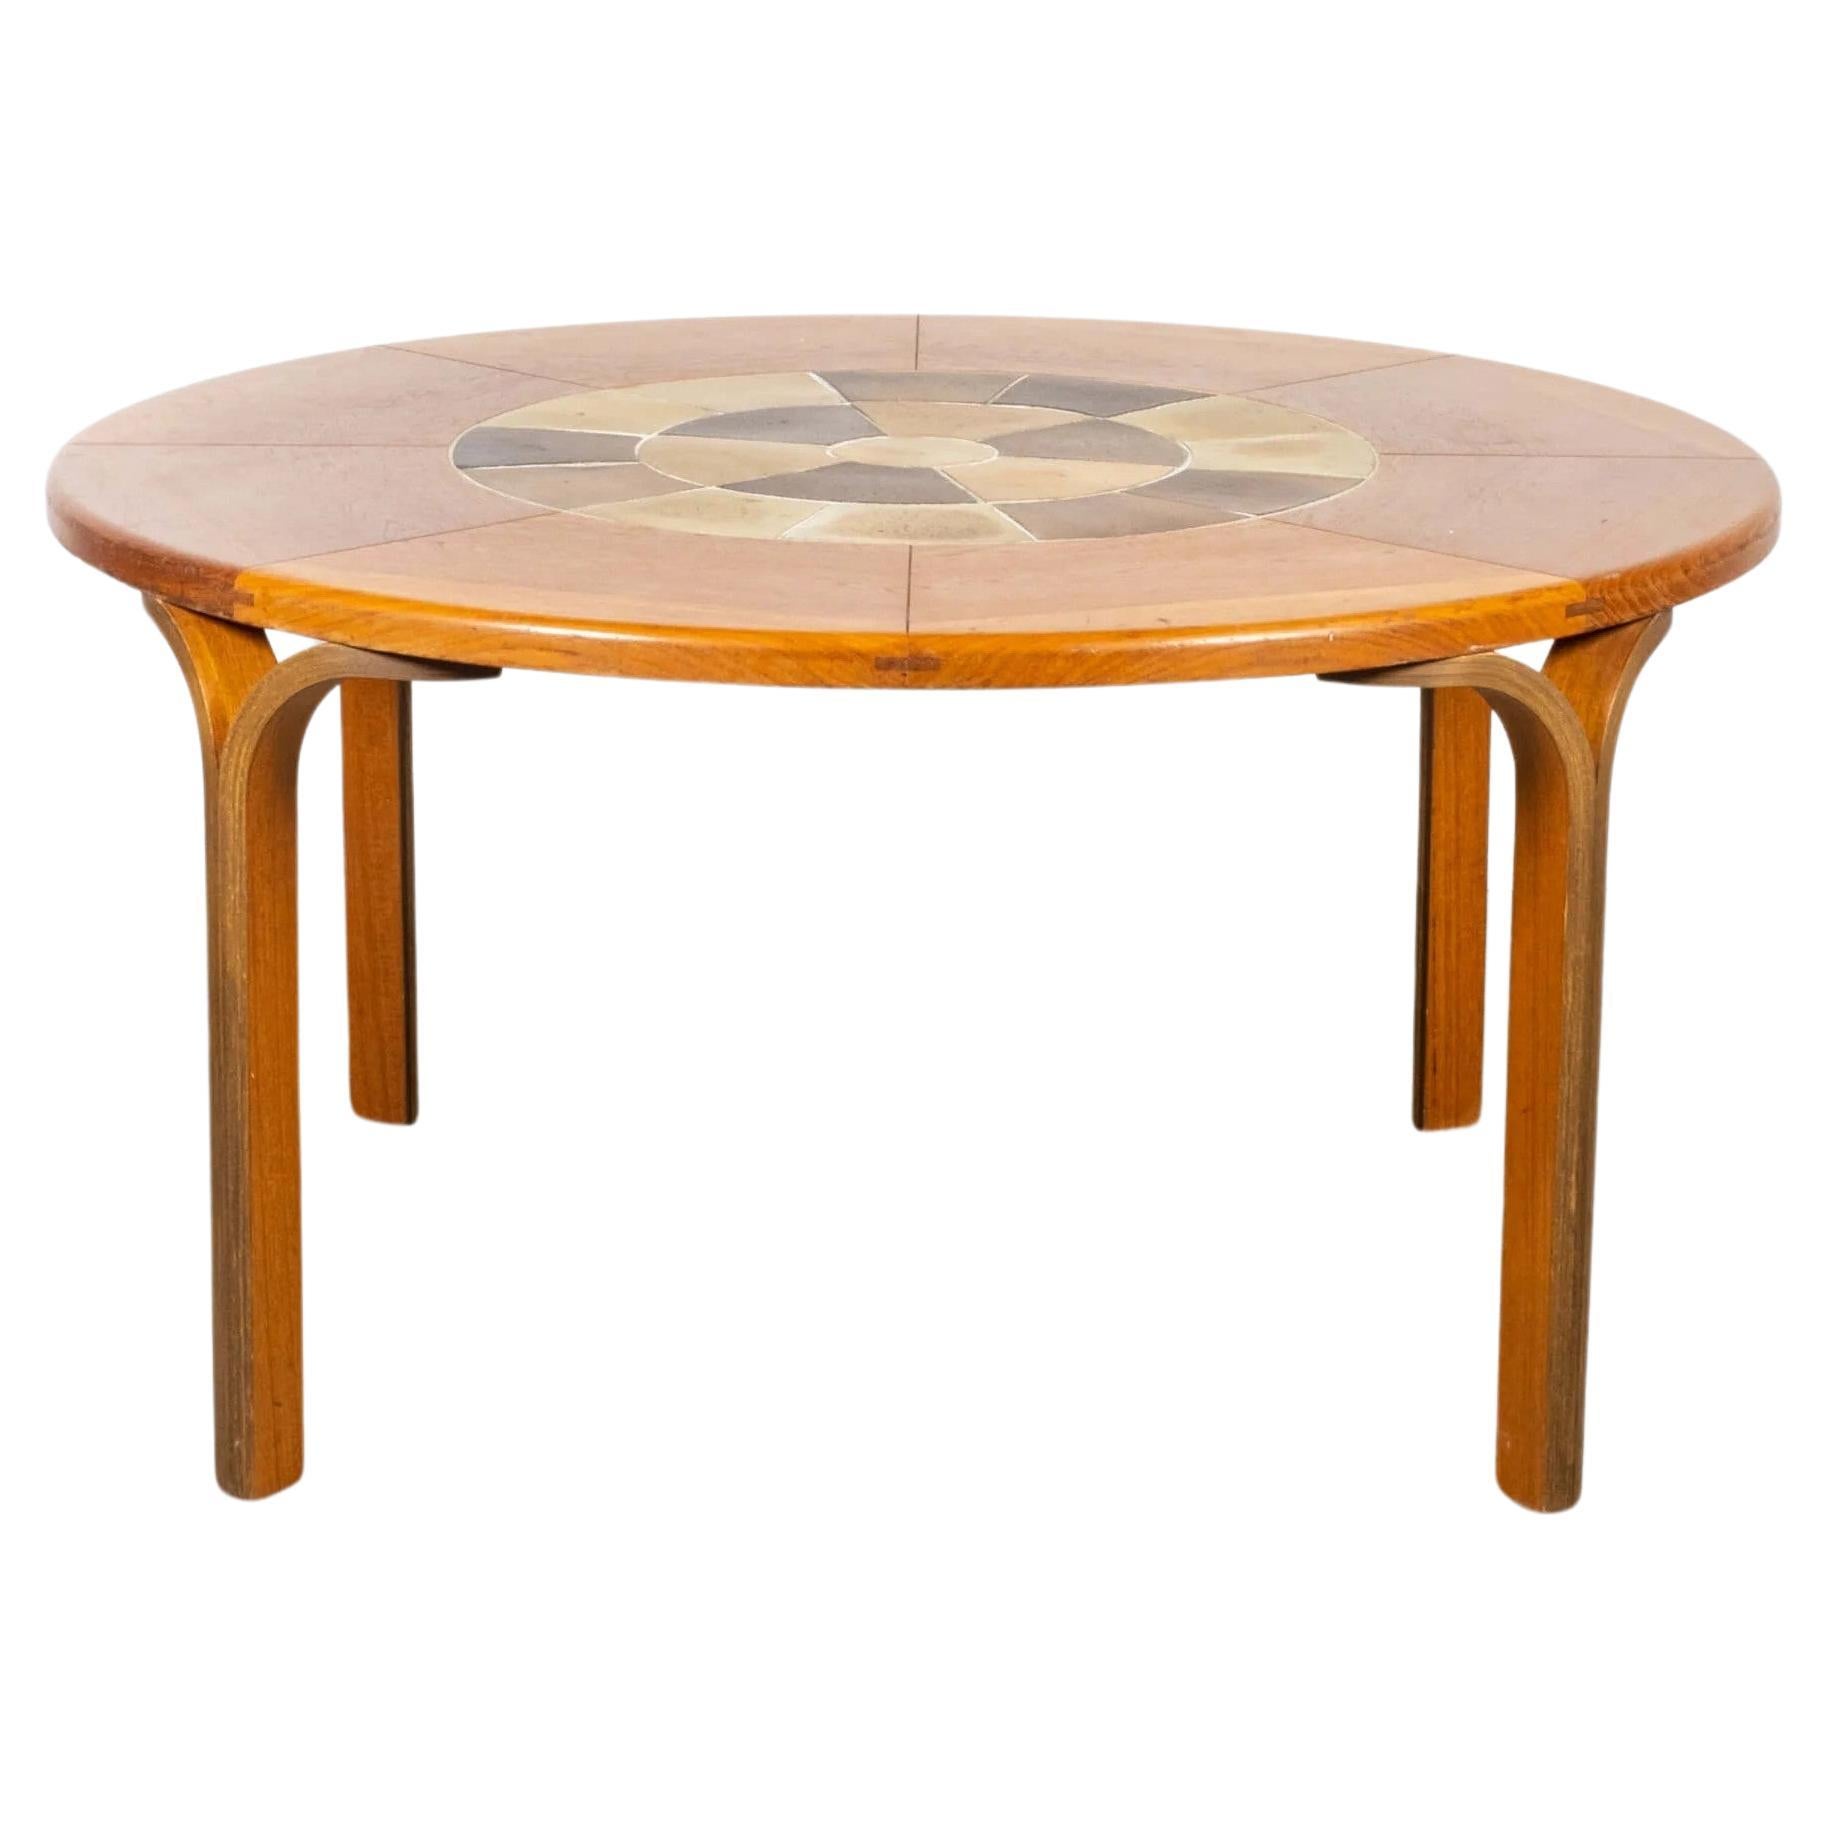 Haslev Mobelsnedkeri Round Tiled-Top Dining Table by Tue Poulsen